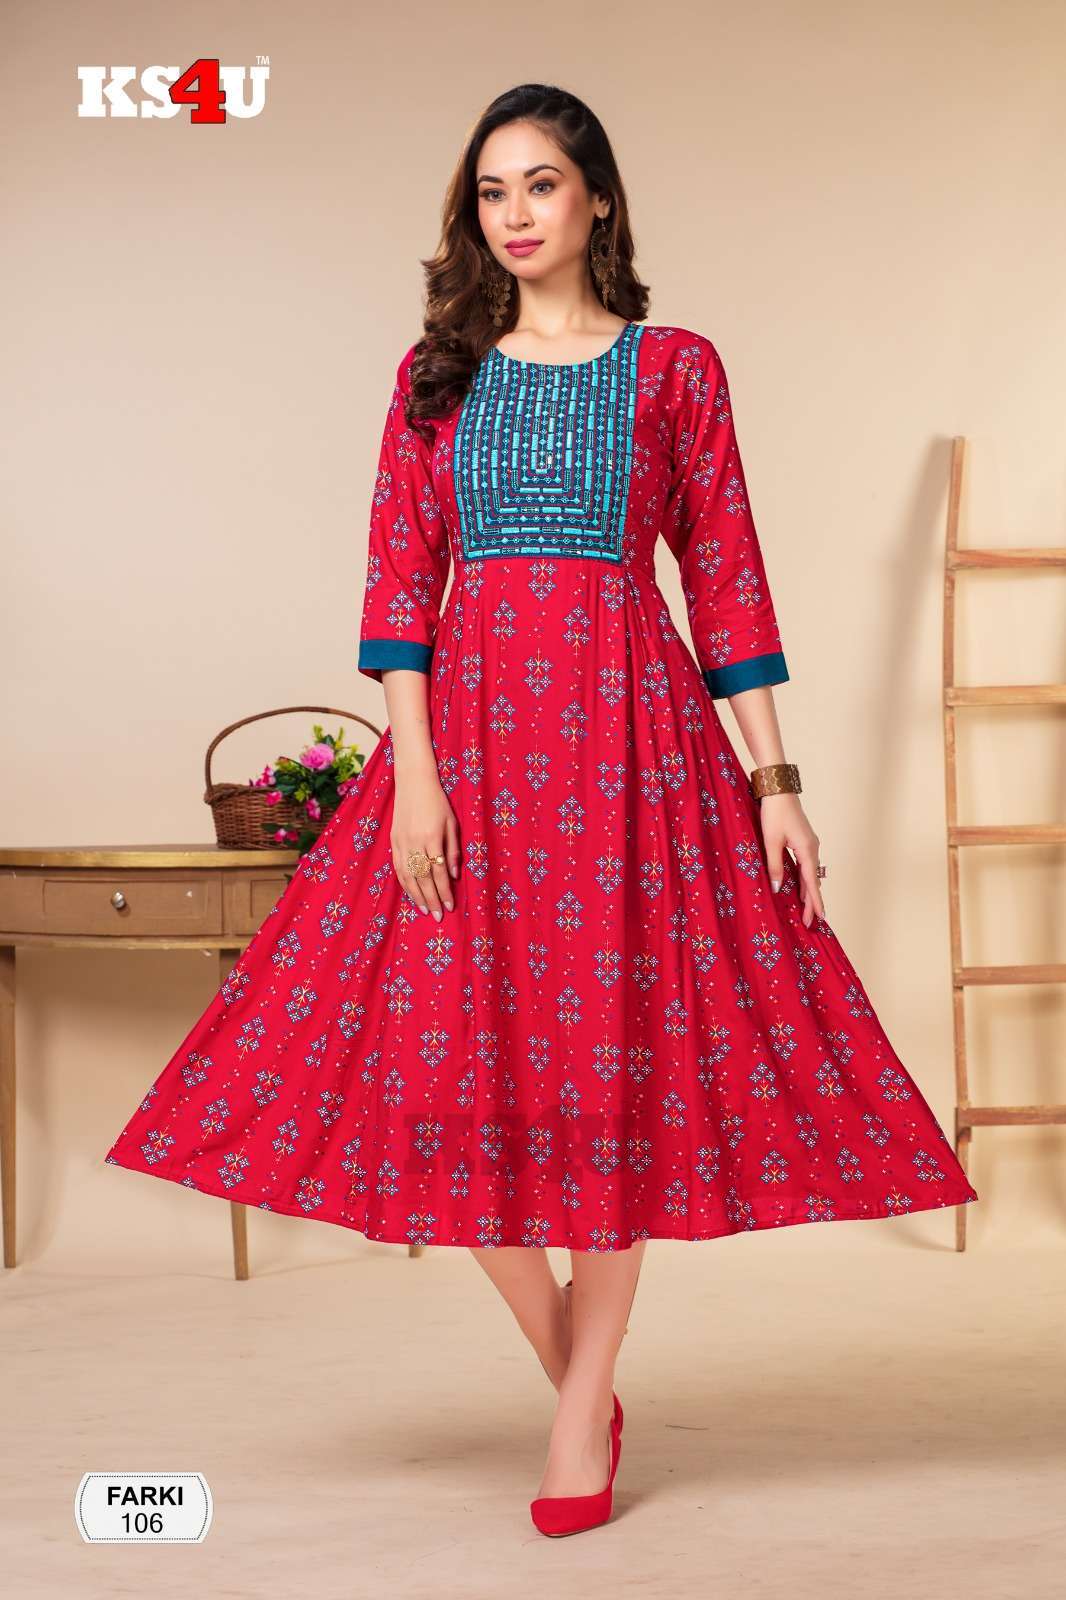 List of top Kurti Designs for Cutting & Stitching [2023]